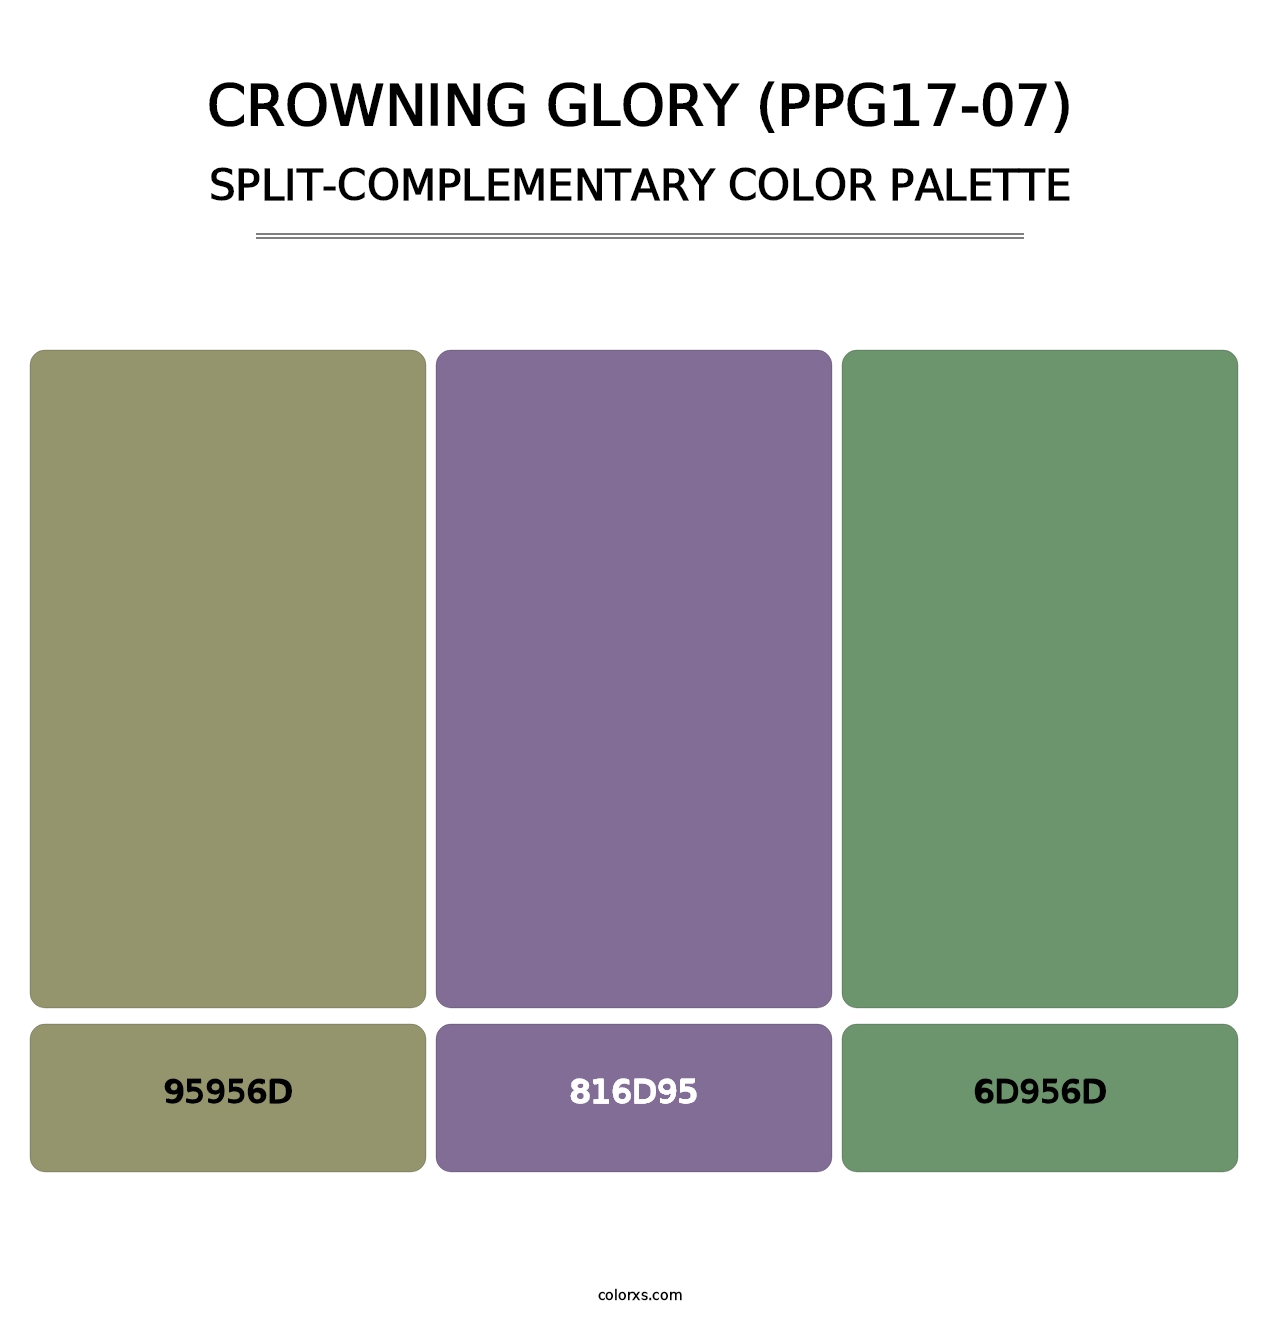 Crowning Glory (PPG17-07) - Split-Complementary Color Palette